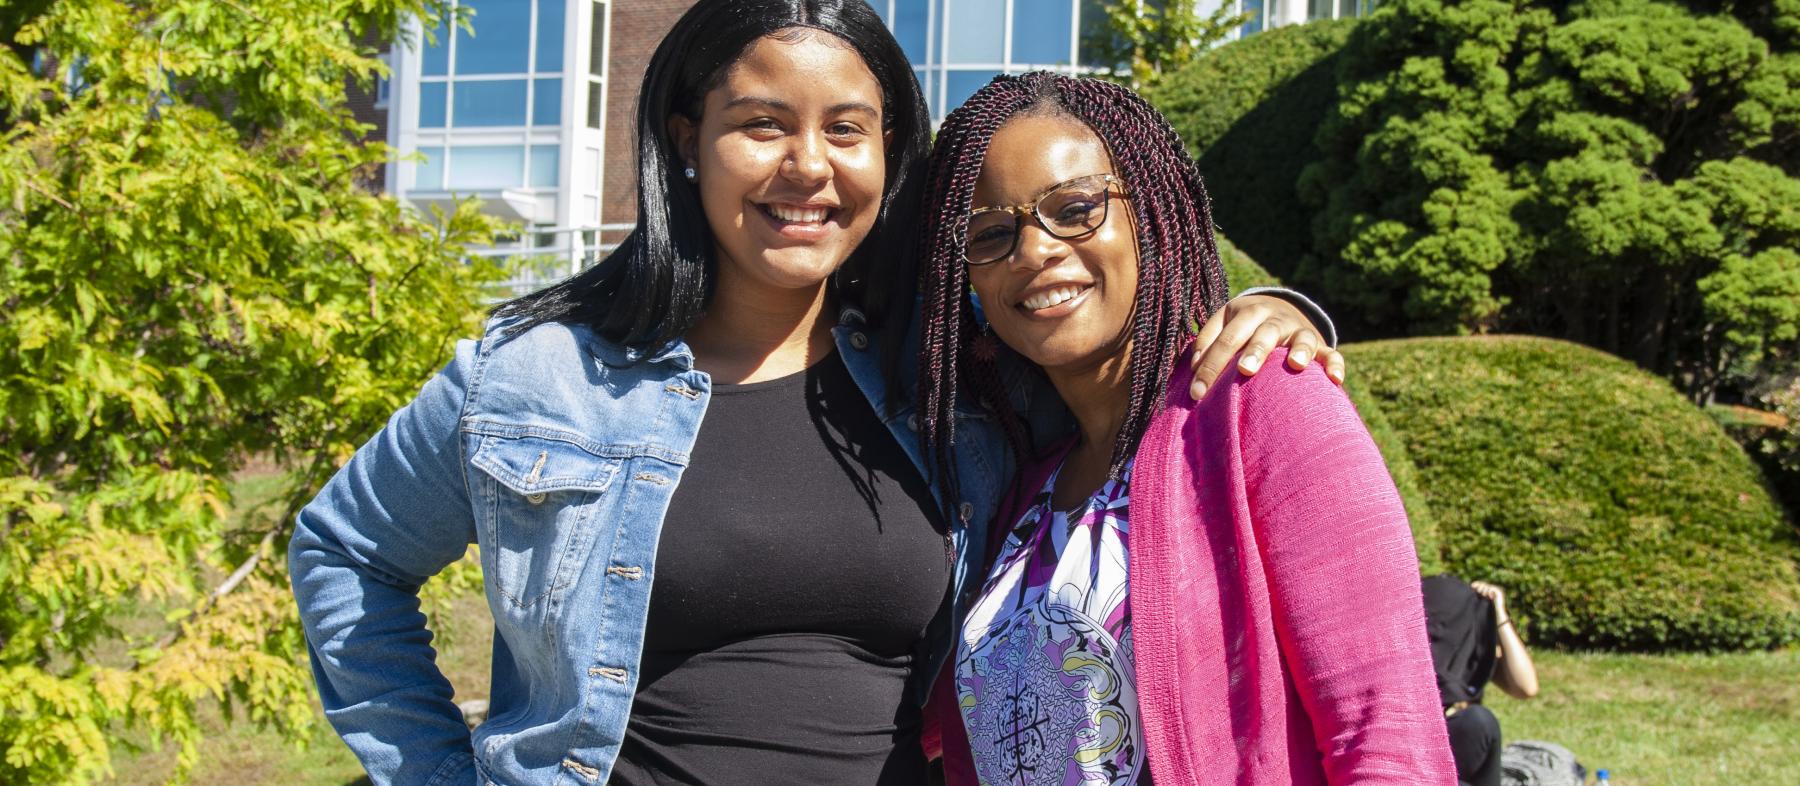 A mentor and mentee pair pose in front of the Harrington Learning Center on a summer day